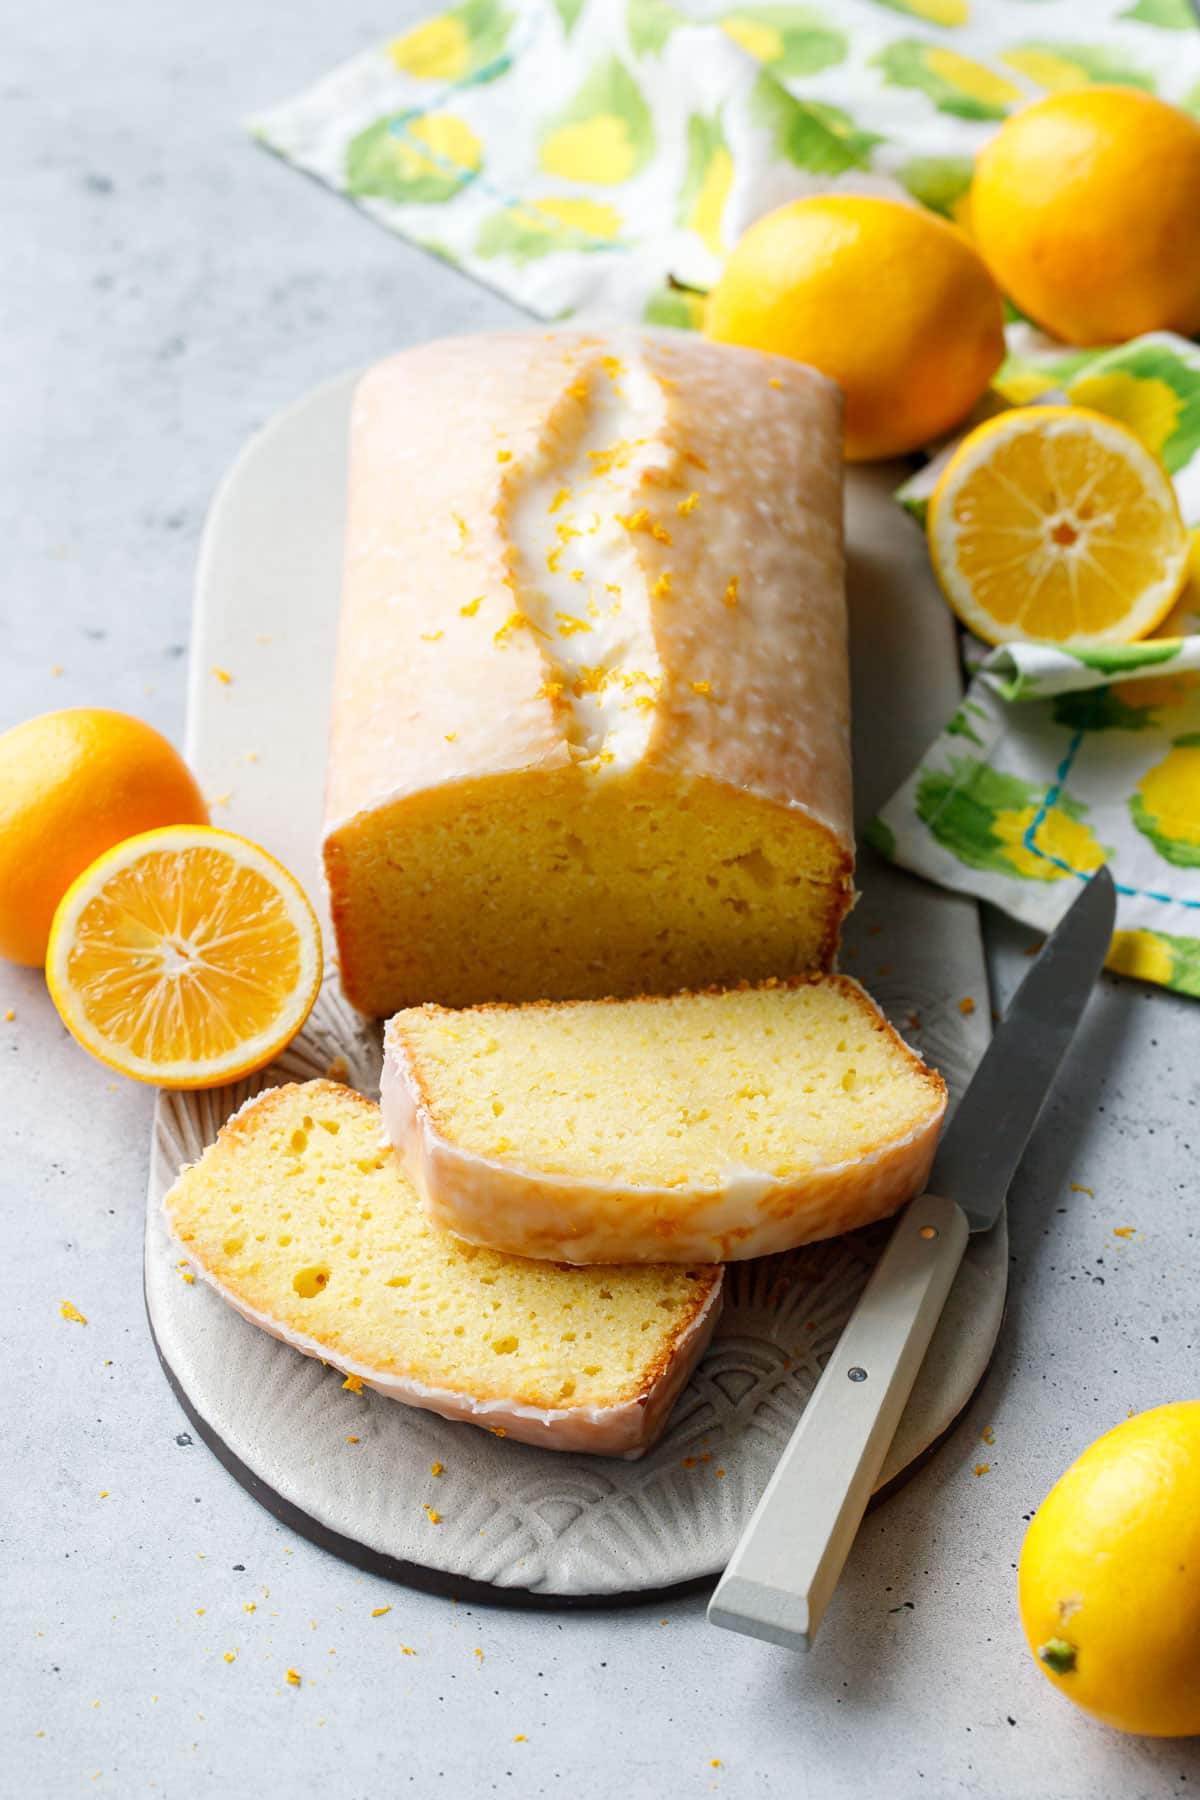 Meyer Lemon Olive Oil Loaf Cake with two slices cut to show the interior texture, whole/half lemons, napkin and a knife around it.